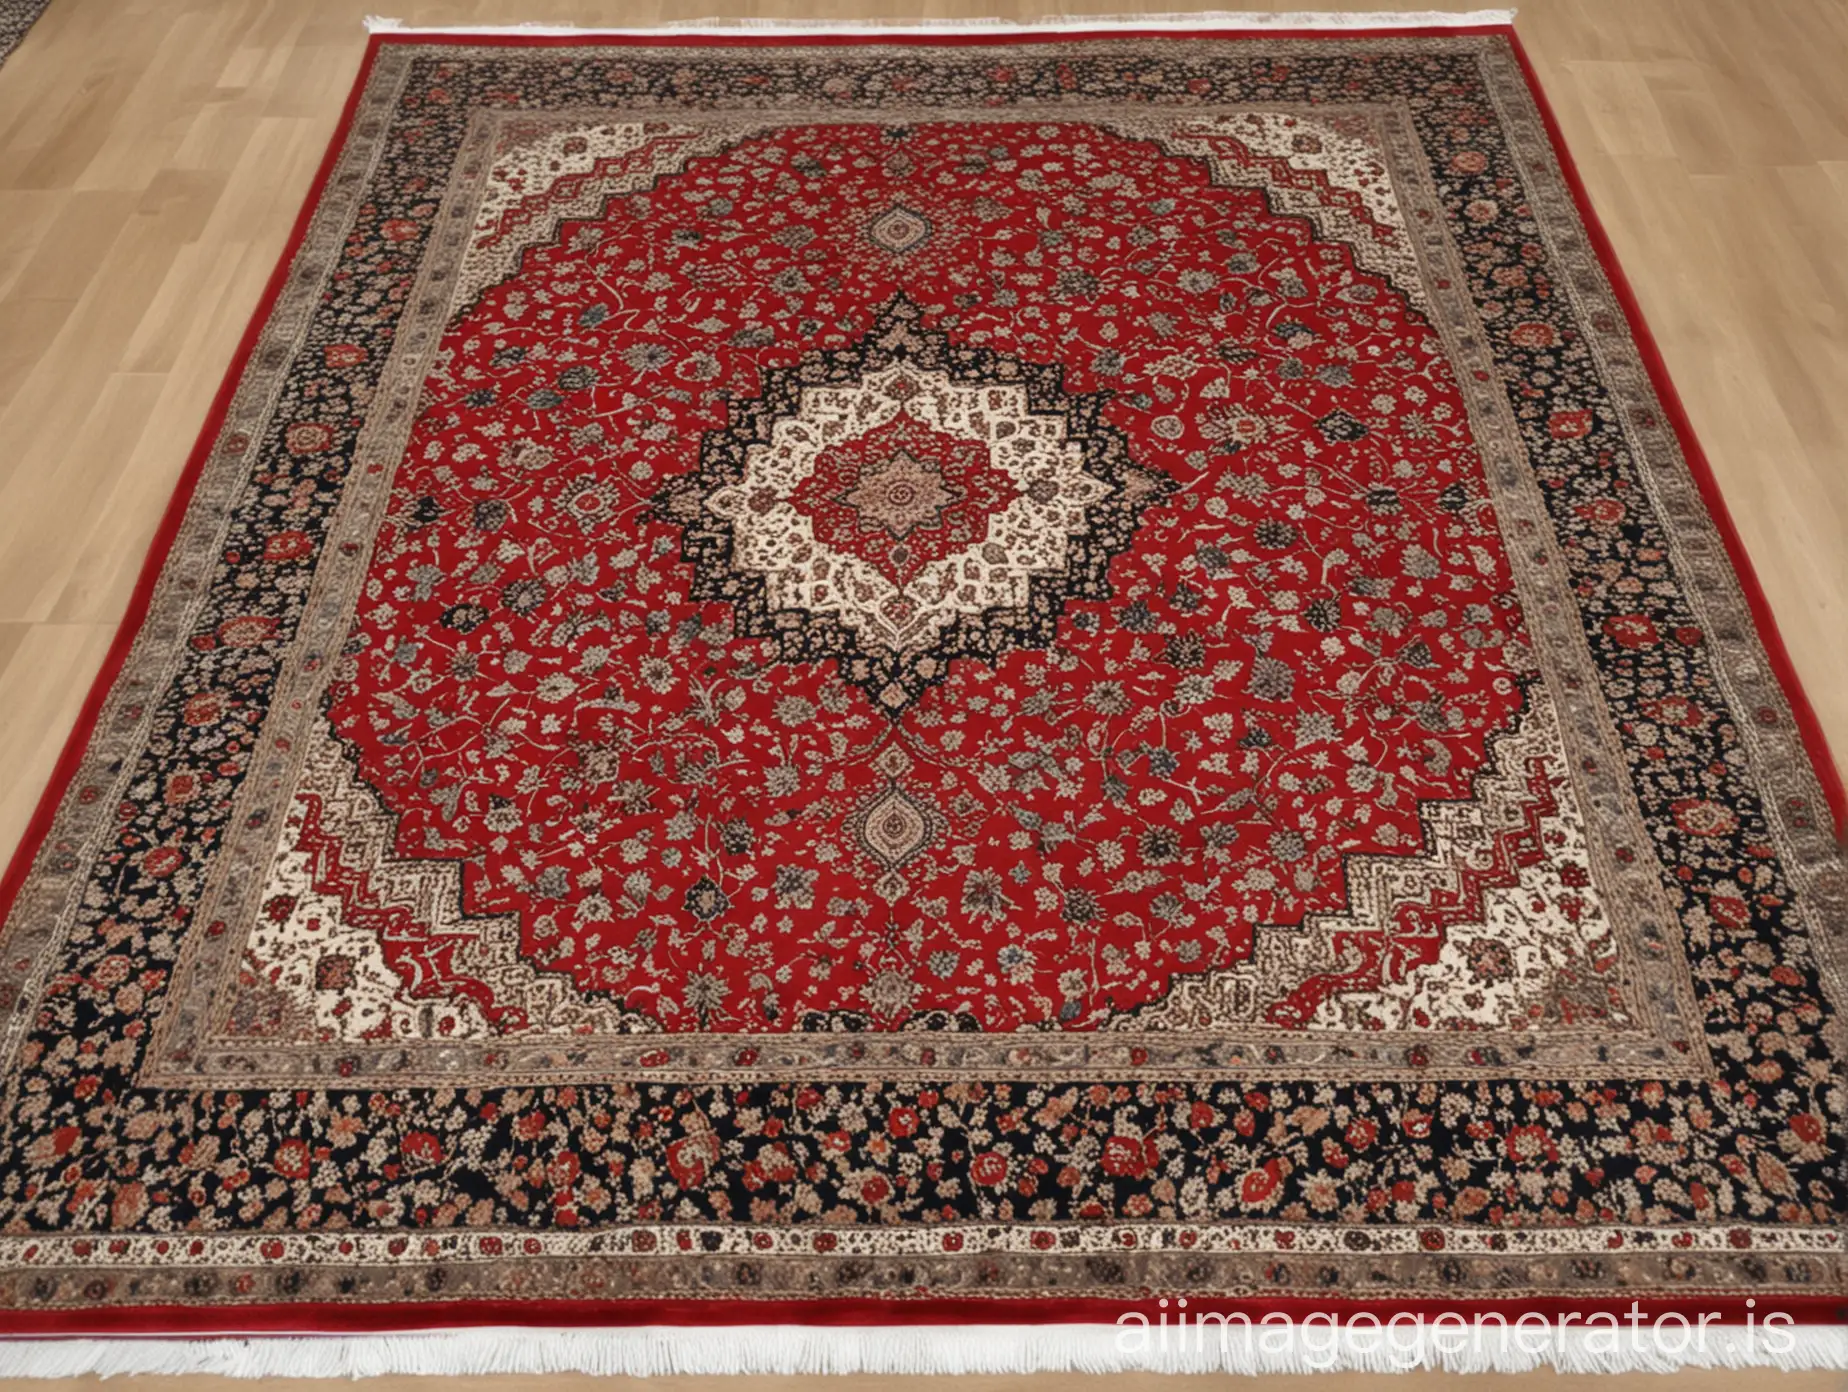 Exquisite-Luxury-Persian-Carpet-with-Intricate-Floral-Patterns